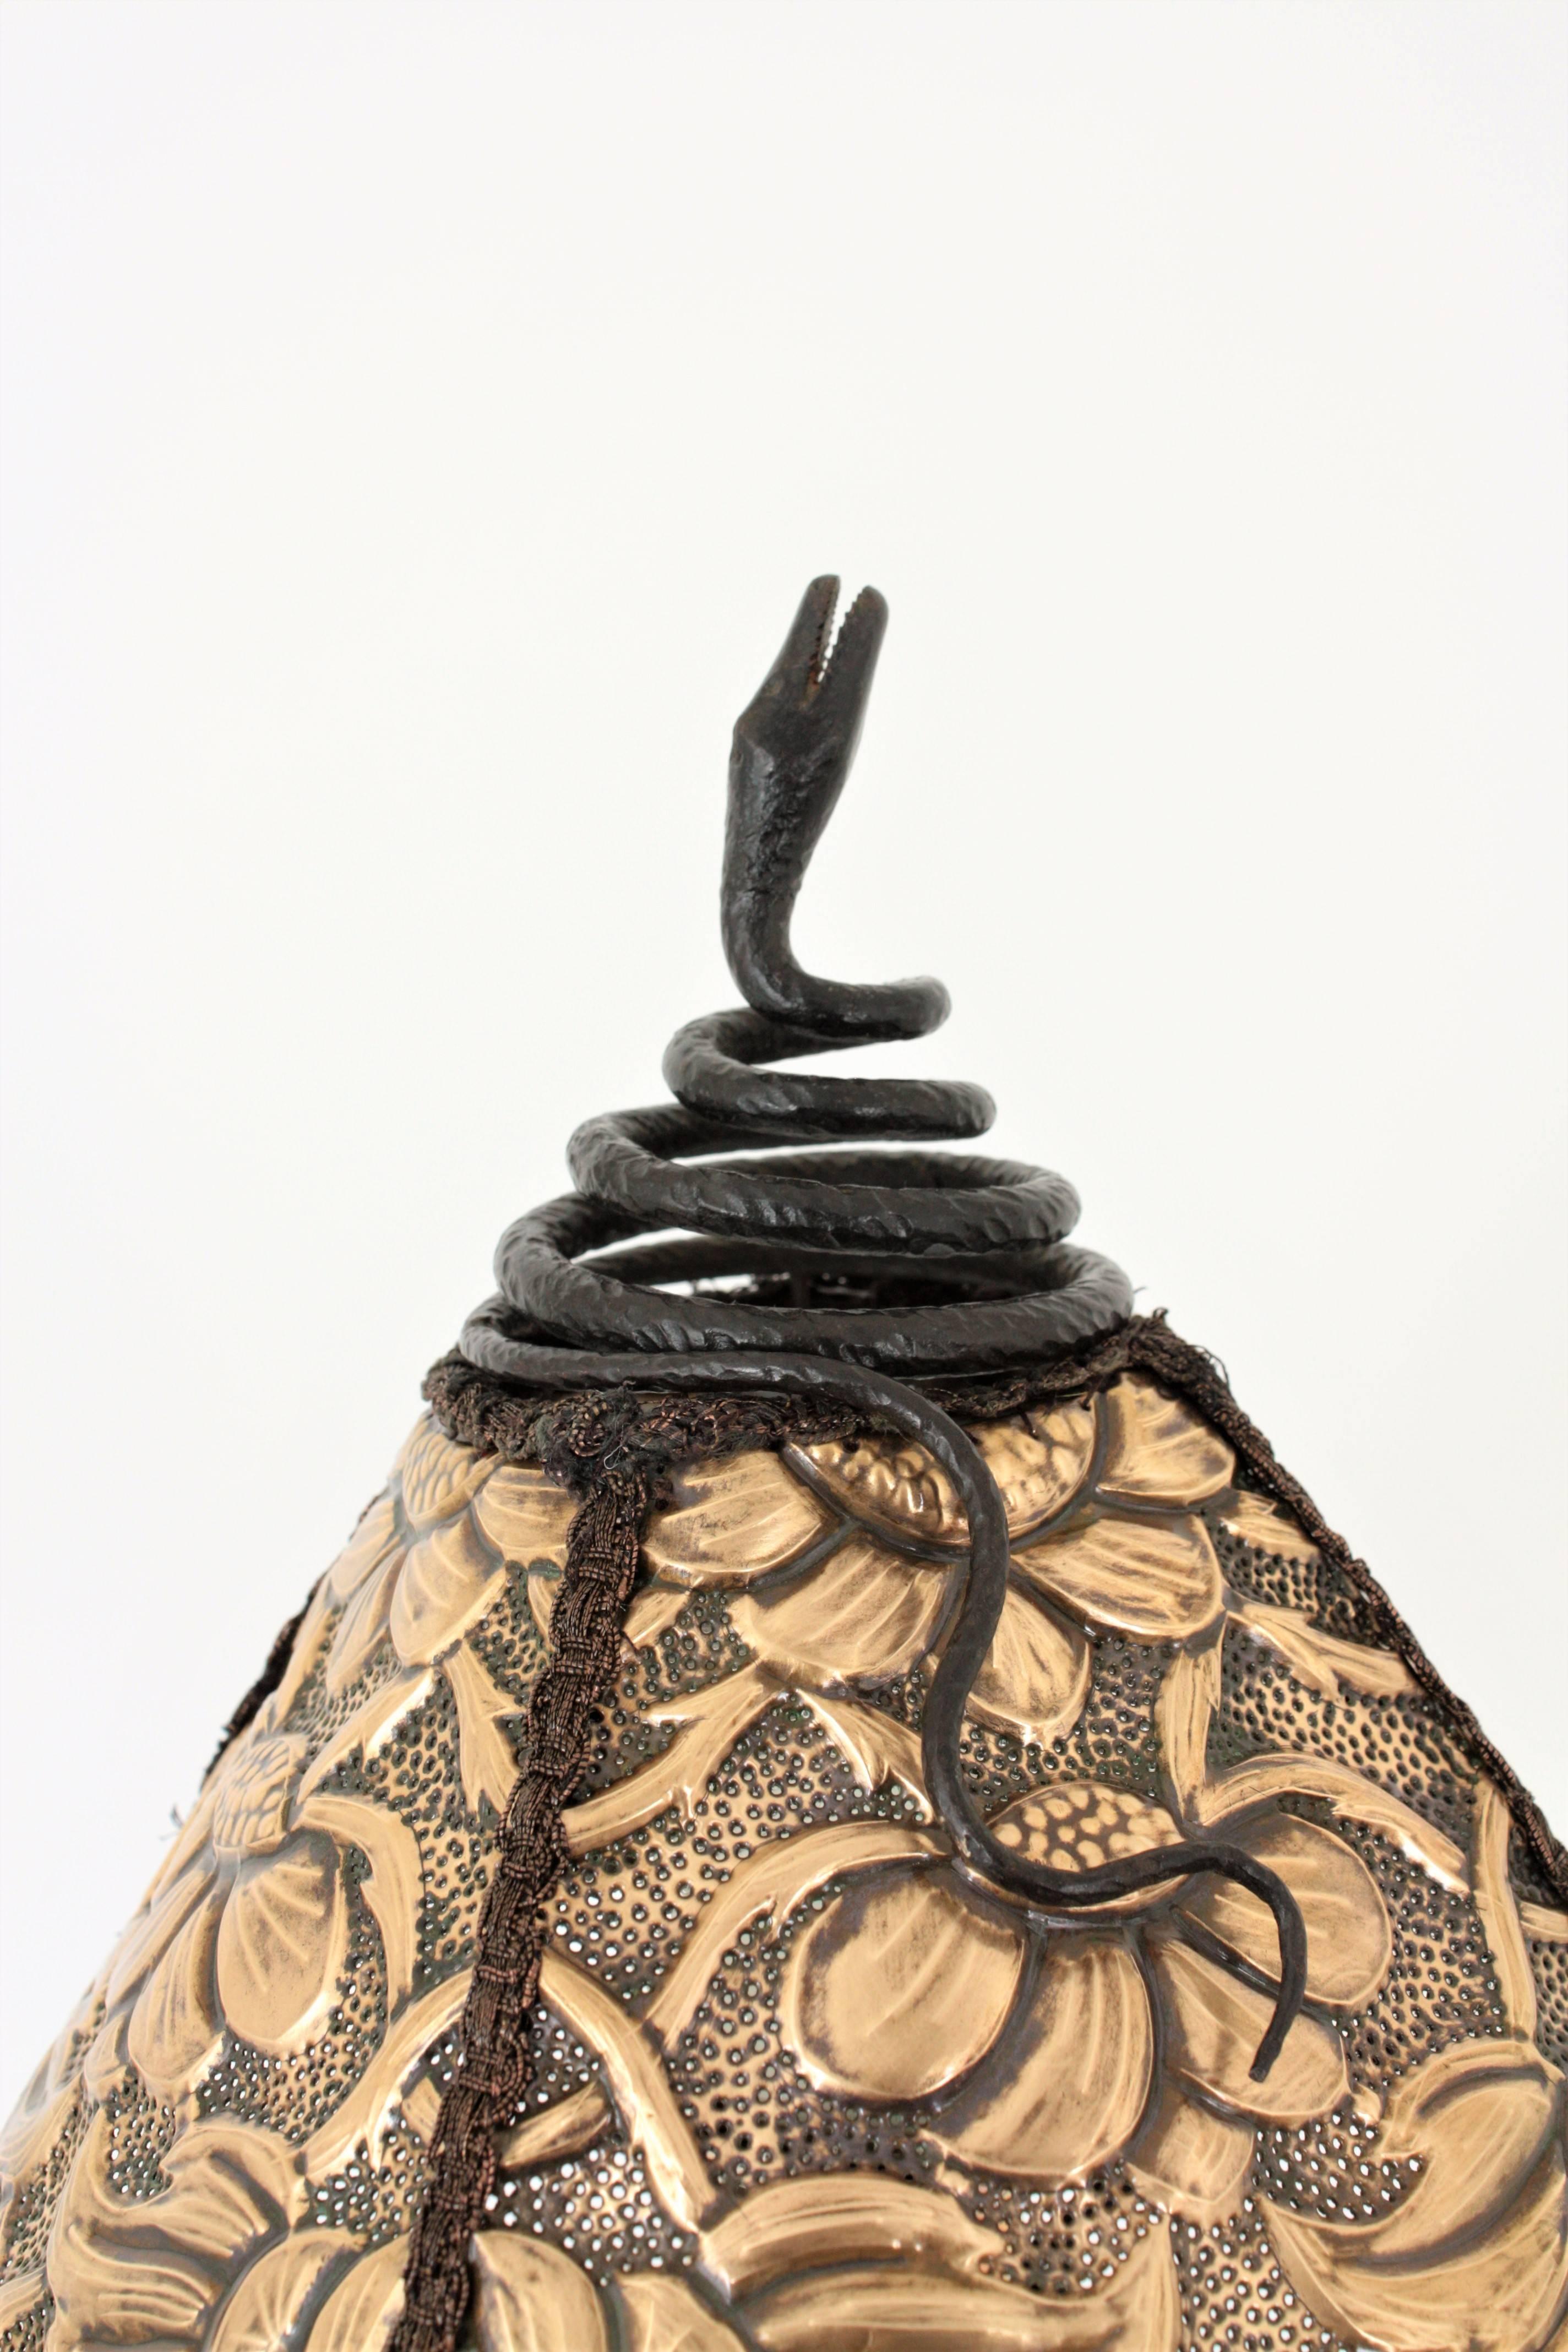 Unique Art Nouveau hand-hammered iron sculptural table lamp from Barcelona. Early 20th century, Spain.
This amazing hand forged piece is made in the manner of Antoni Gaudí iron designs. The lamp is decorated by an iron figure of a snake and